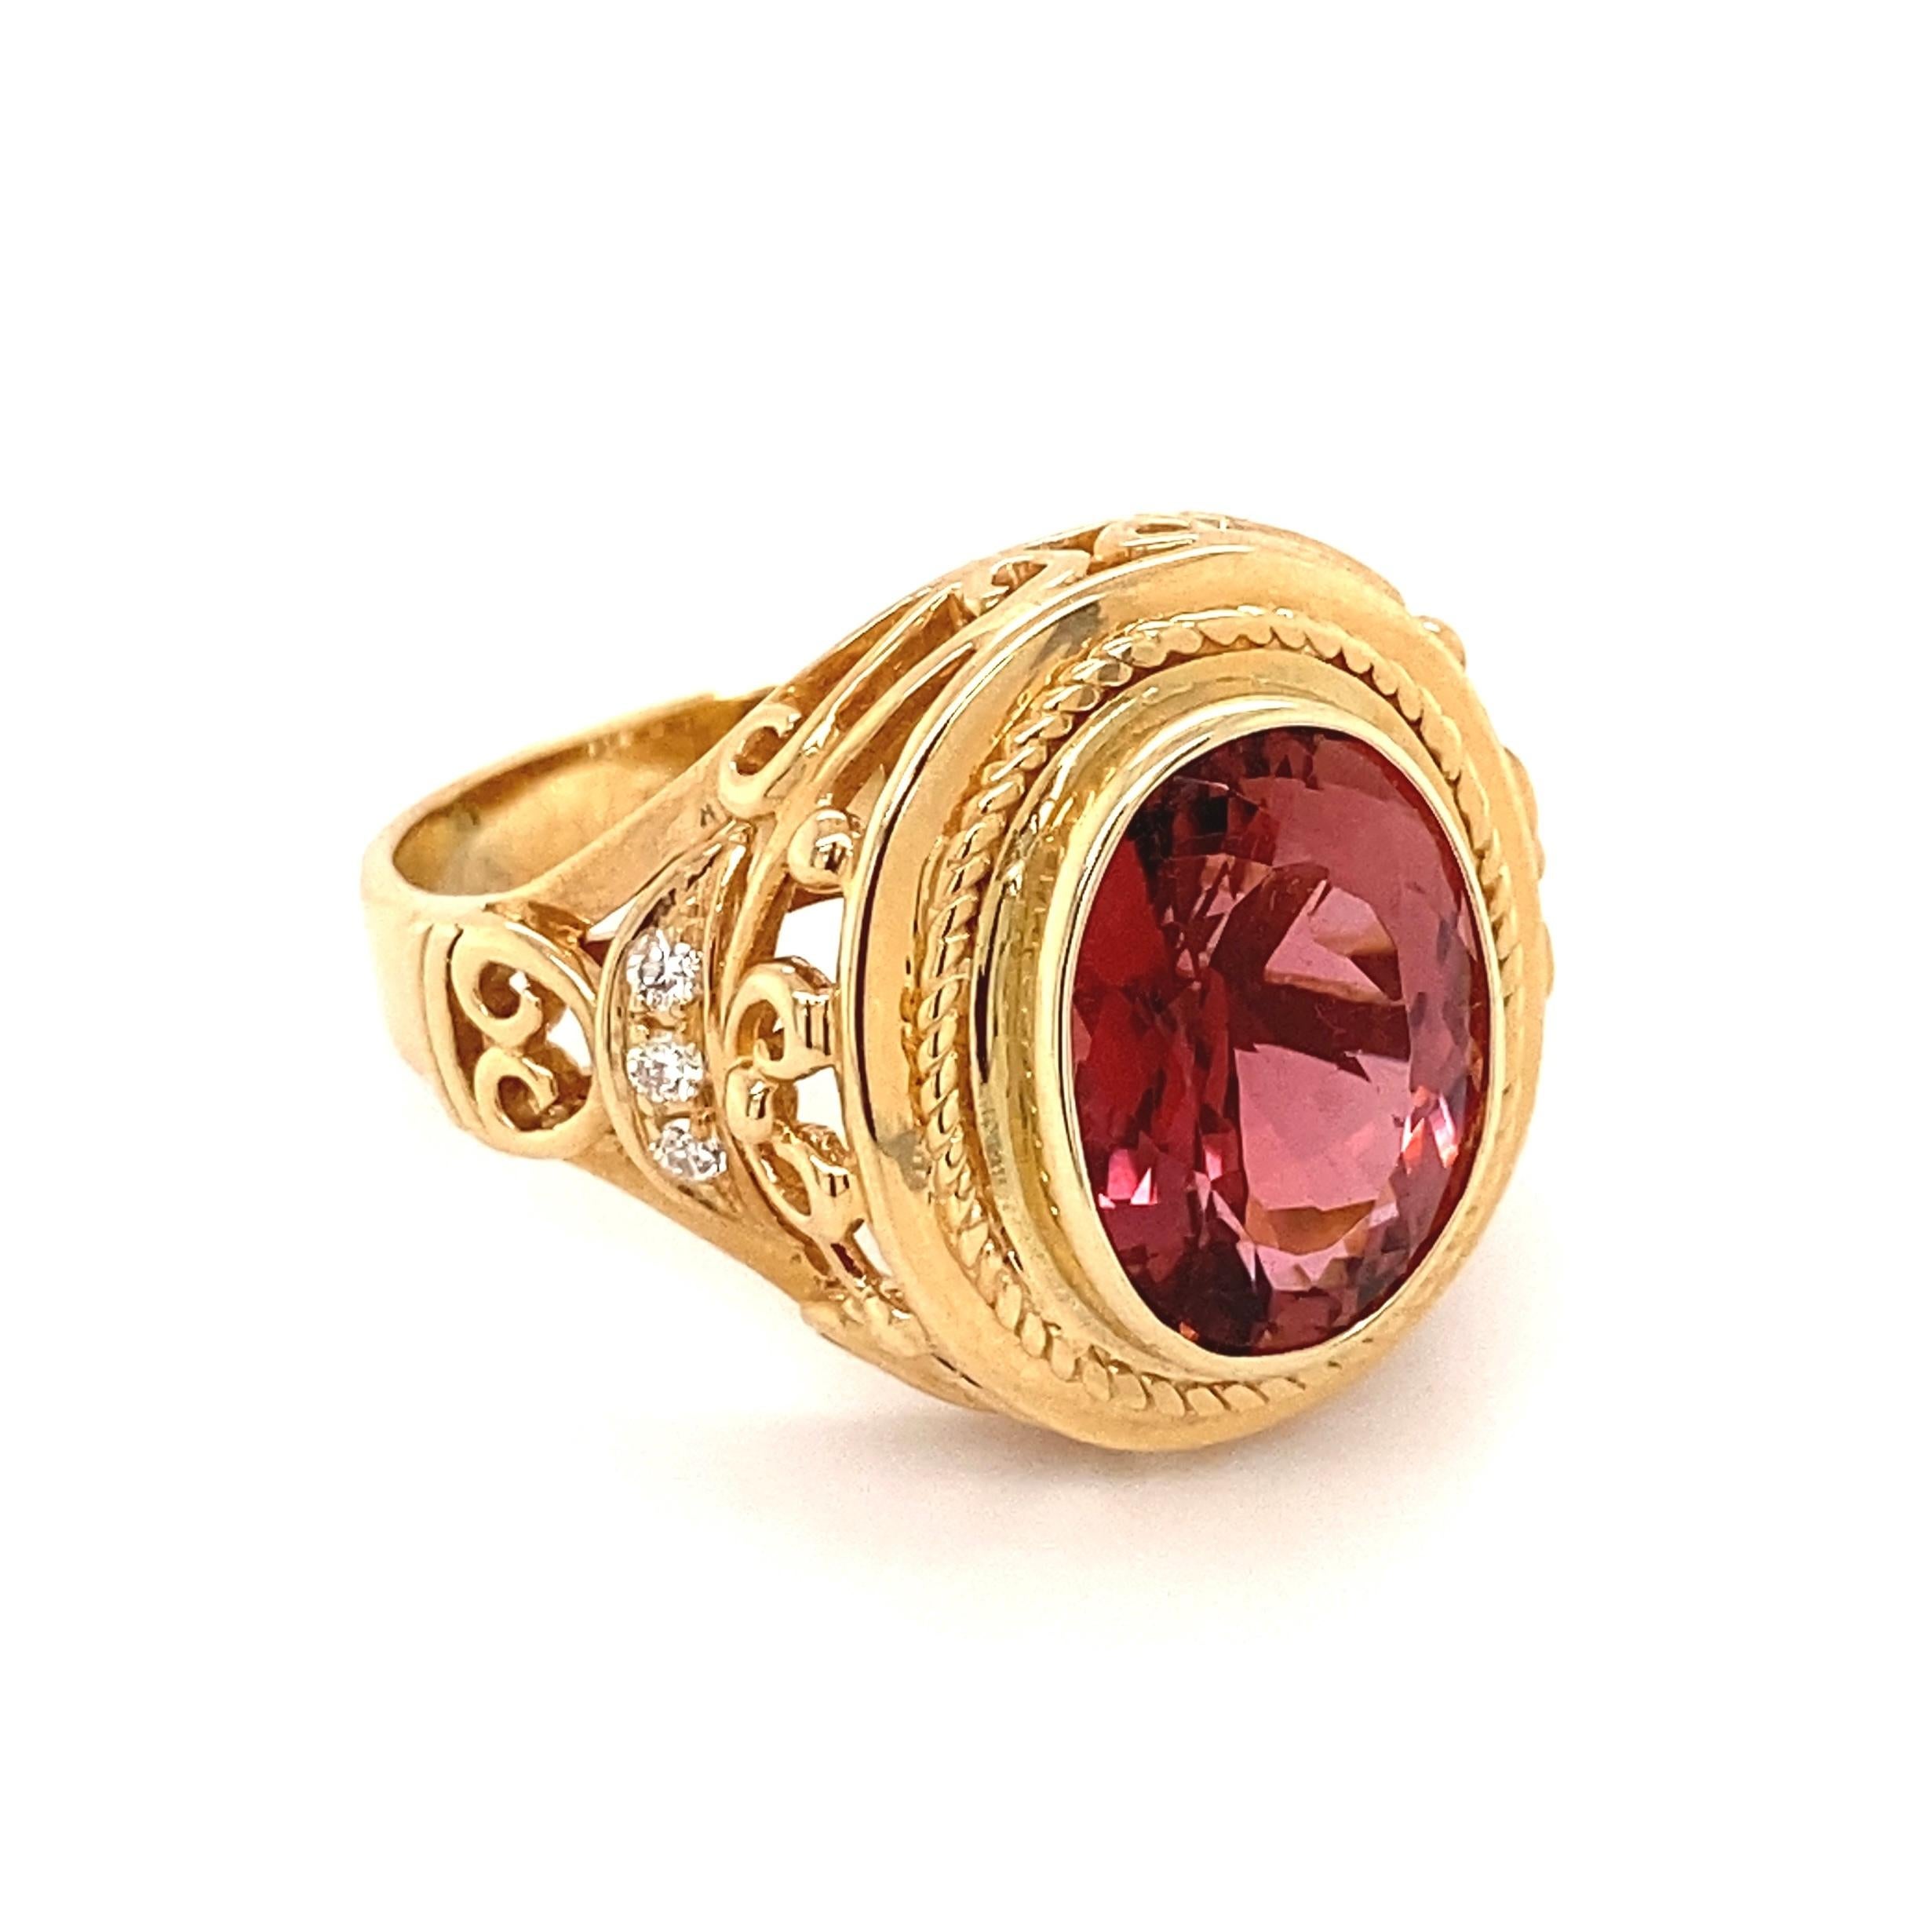 Simply Beautiful! Timeless and finely detailed Pink Tourmaline and Diamond Cocktail Ring, center securely nestled with a Hand set 6.10 Carat Oval Pink Tourmaline and Diamonds, weighing approx. 0.16tcw accent the sides of shank. Fabulous design!